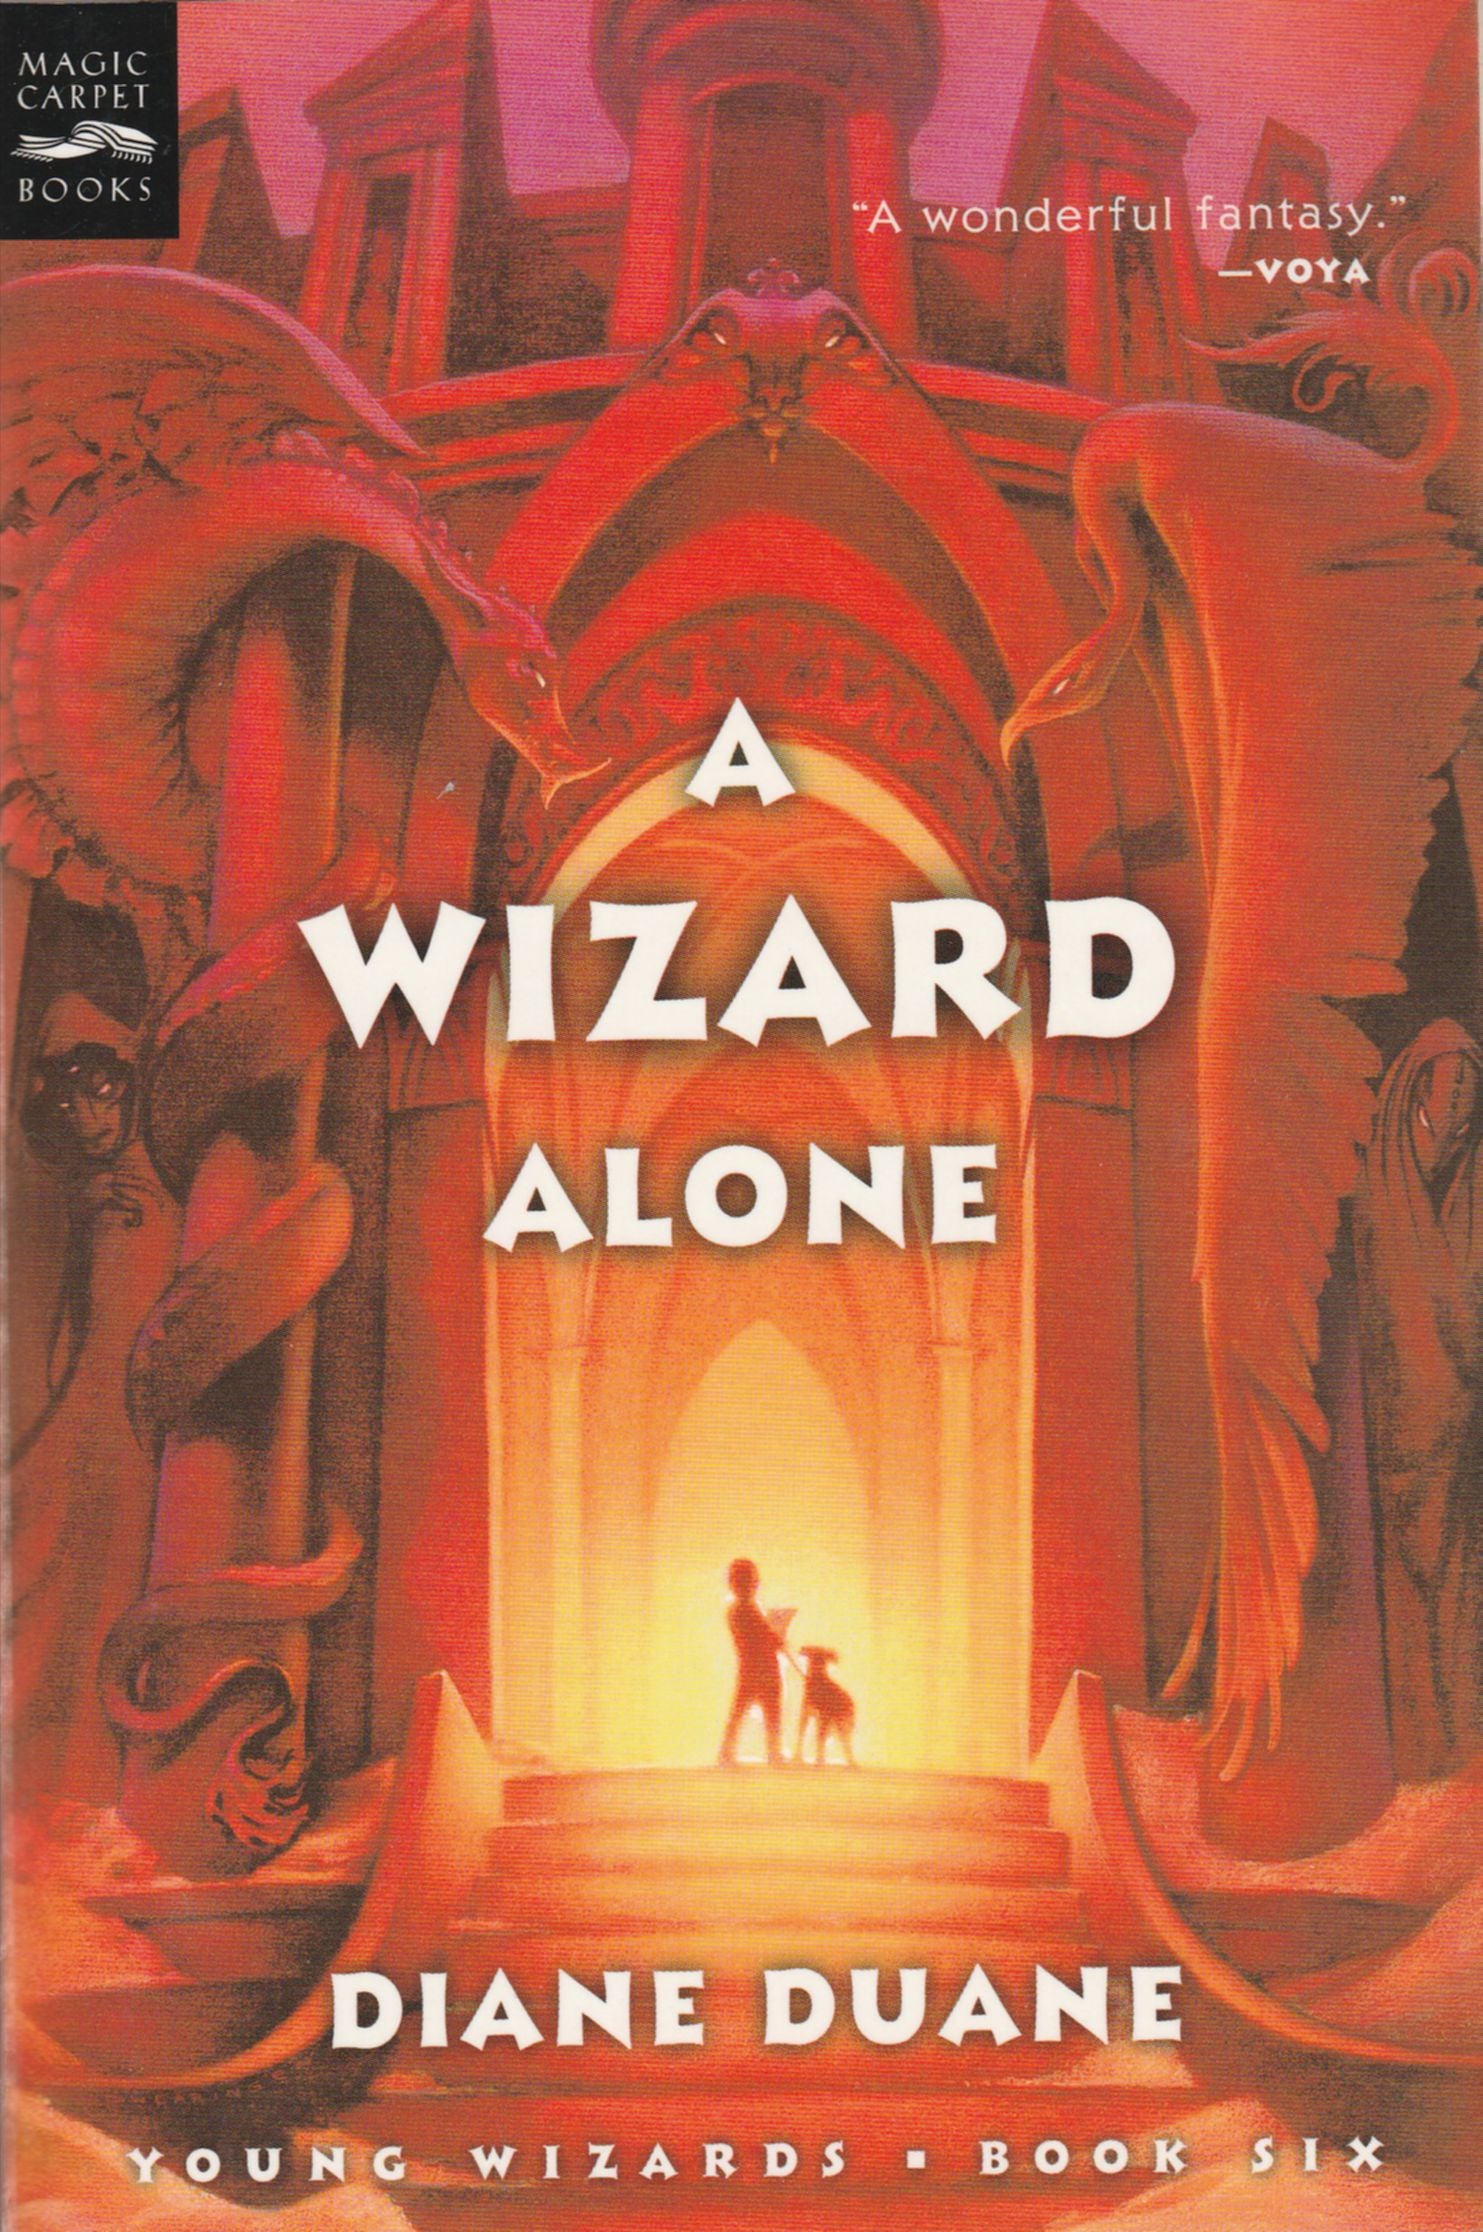 A Wizard Alone, digest format paperback, mint condition, final copies